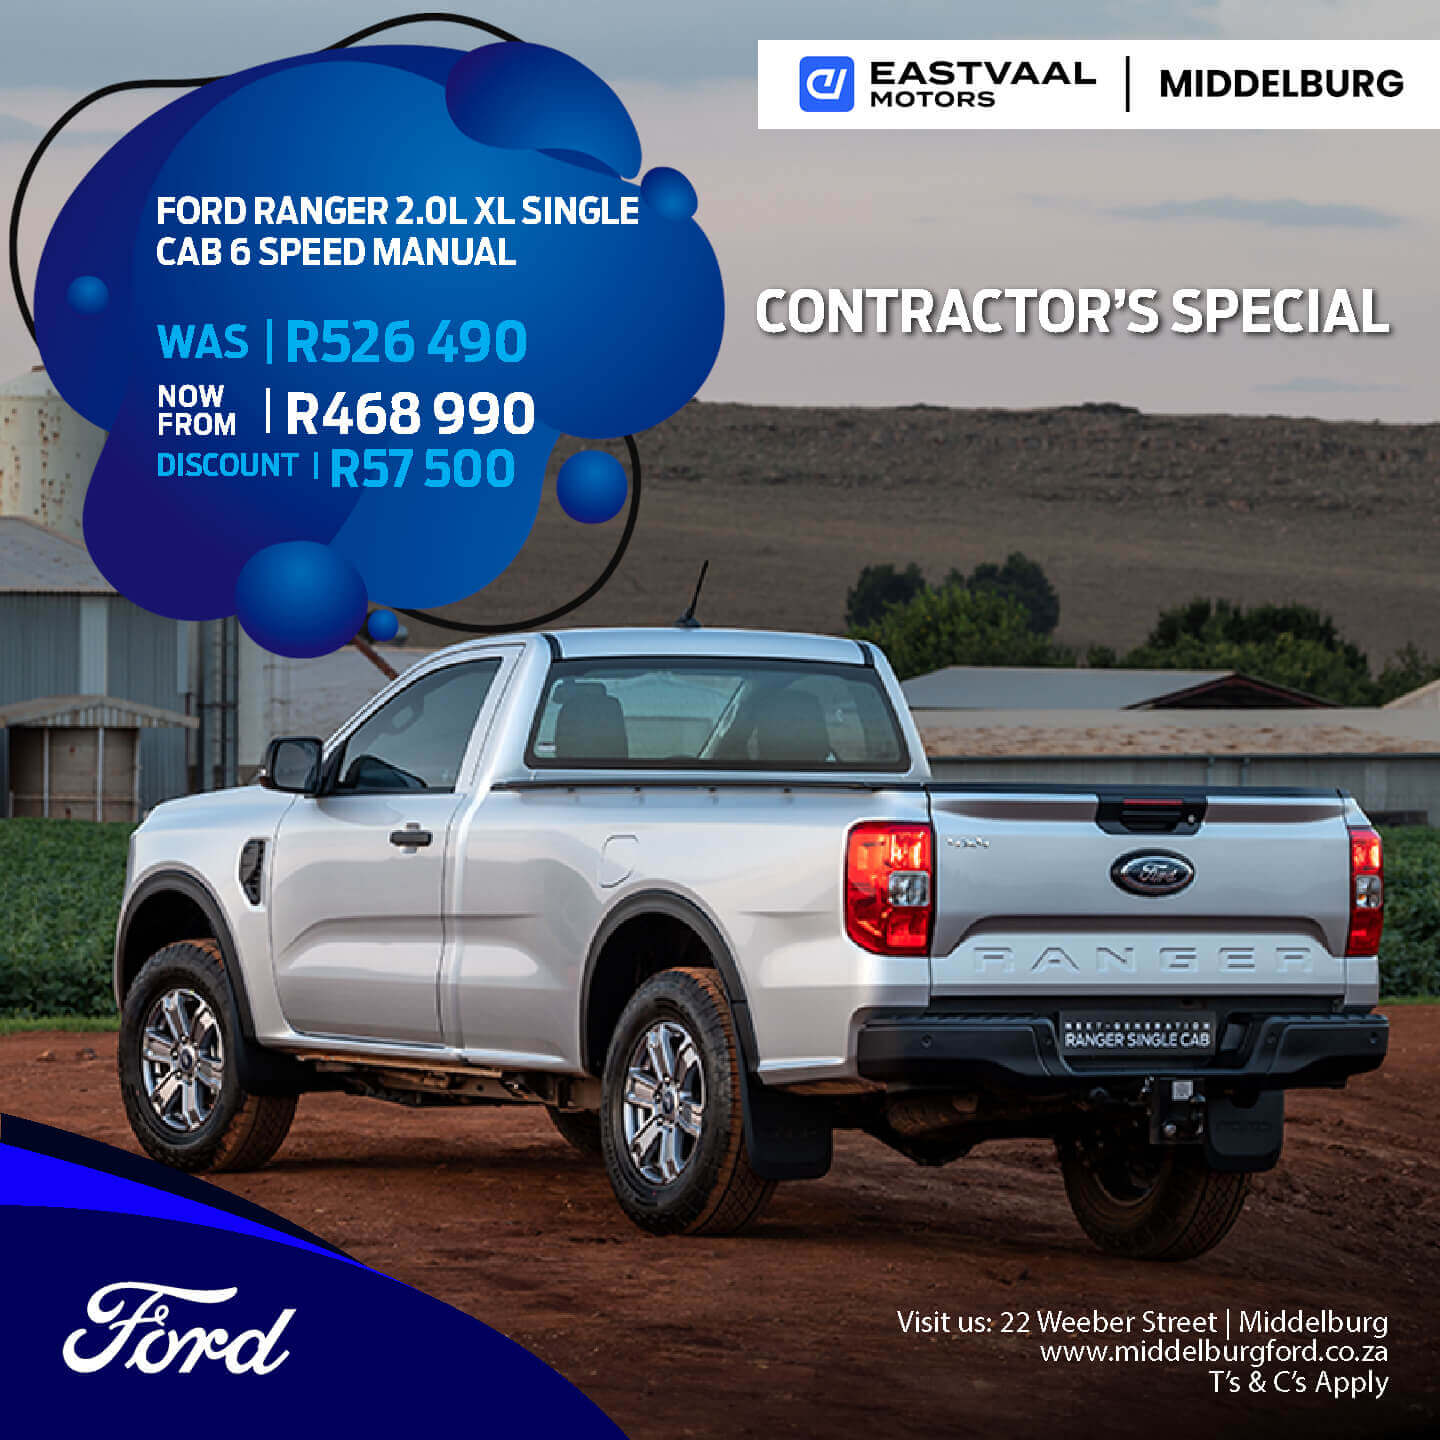 FORD RANGER 2.0L XL image from 